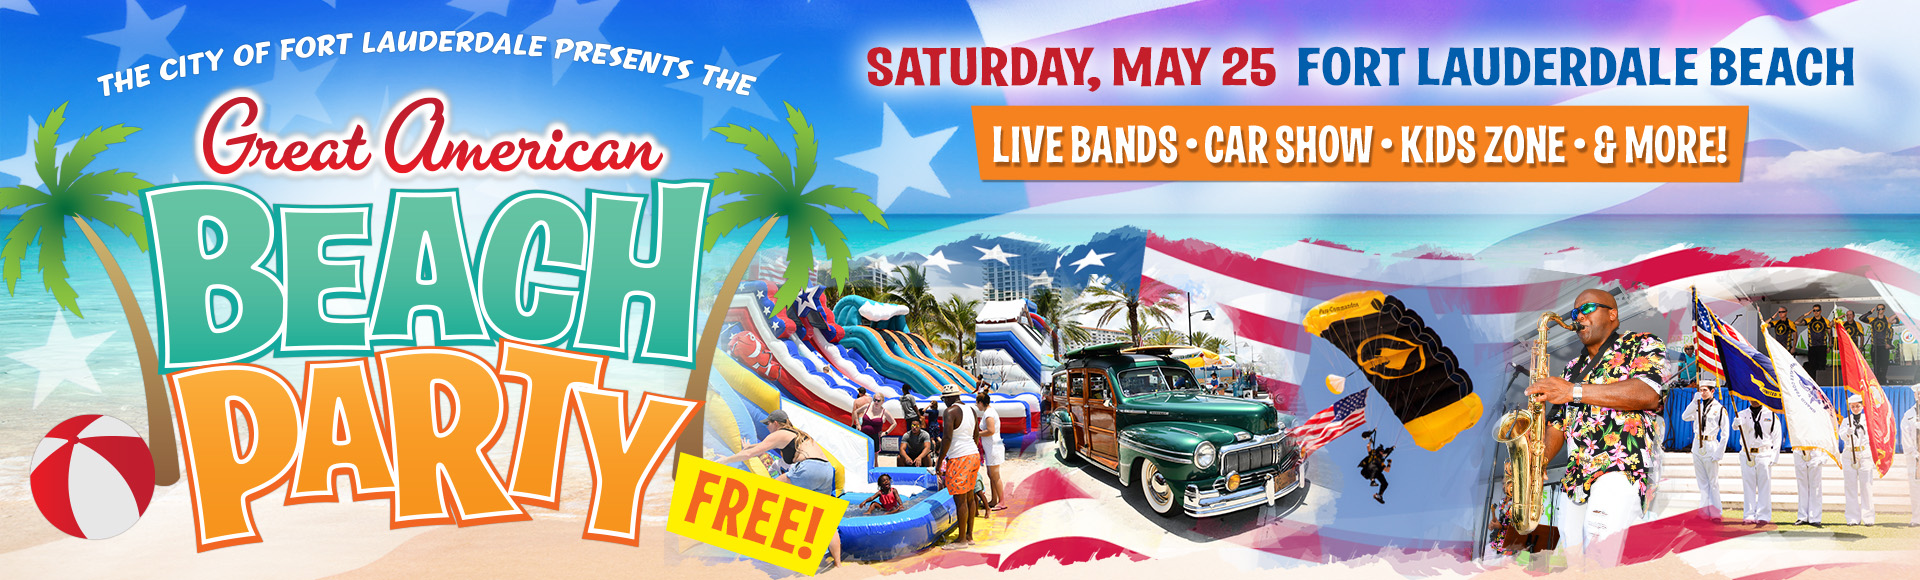 Great American Beach Party. Saturday, May 25. Las Olas Oceanside Park. Free event featuring live bands, kids zone, art show, classic car show, sand sculpting demo, socom para-commandos, and a tribute to the US armed forces